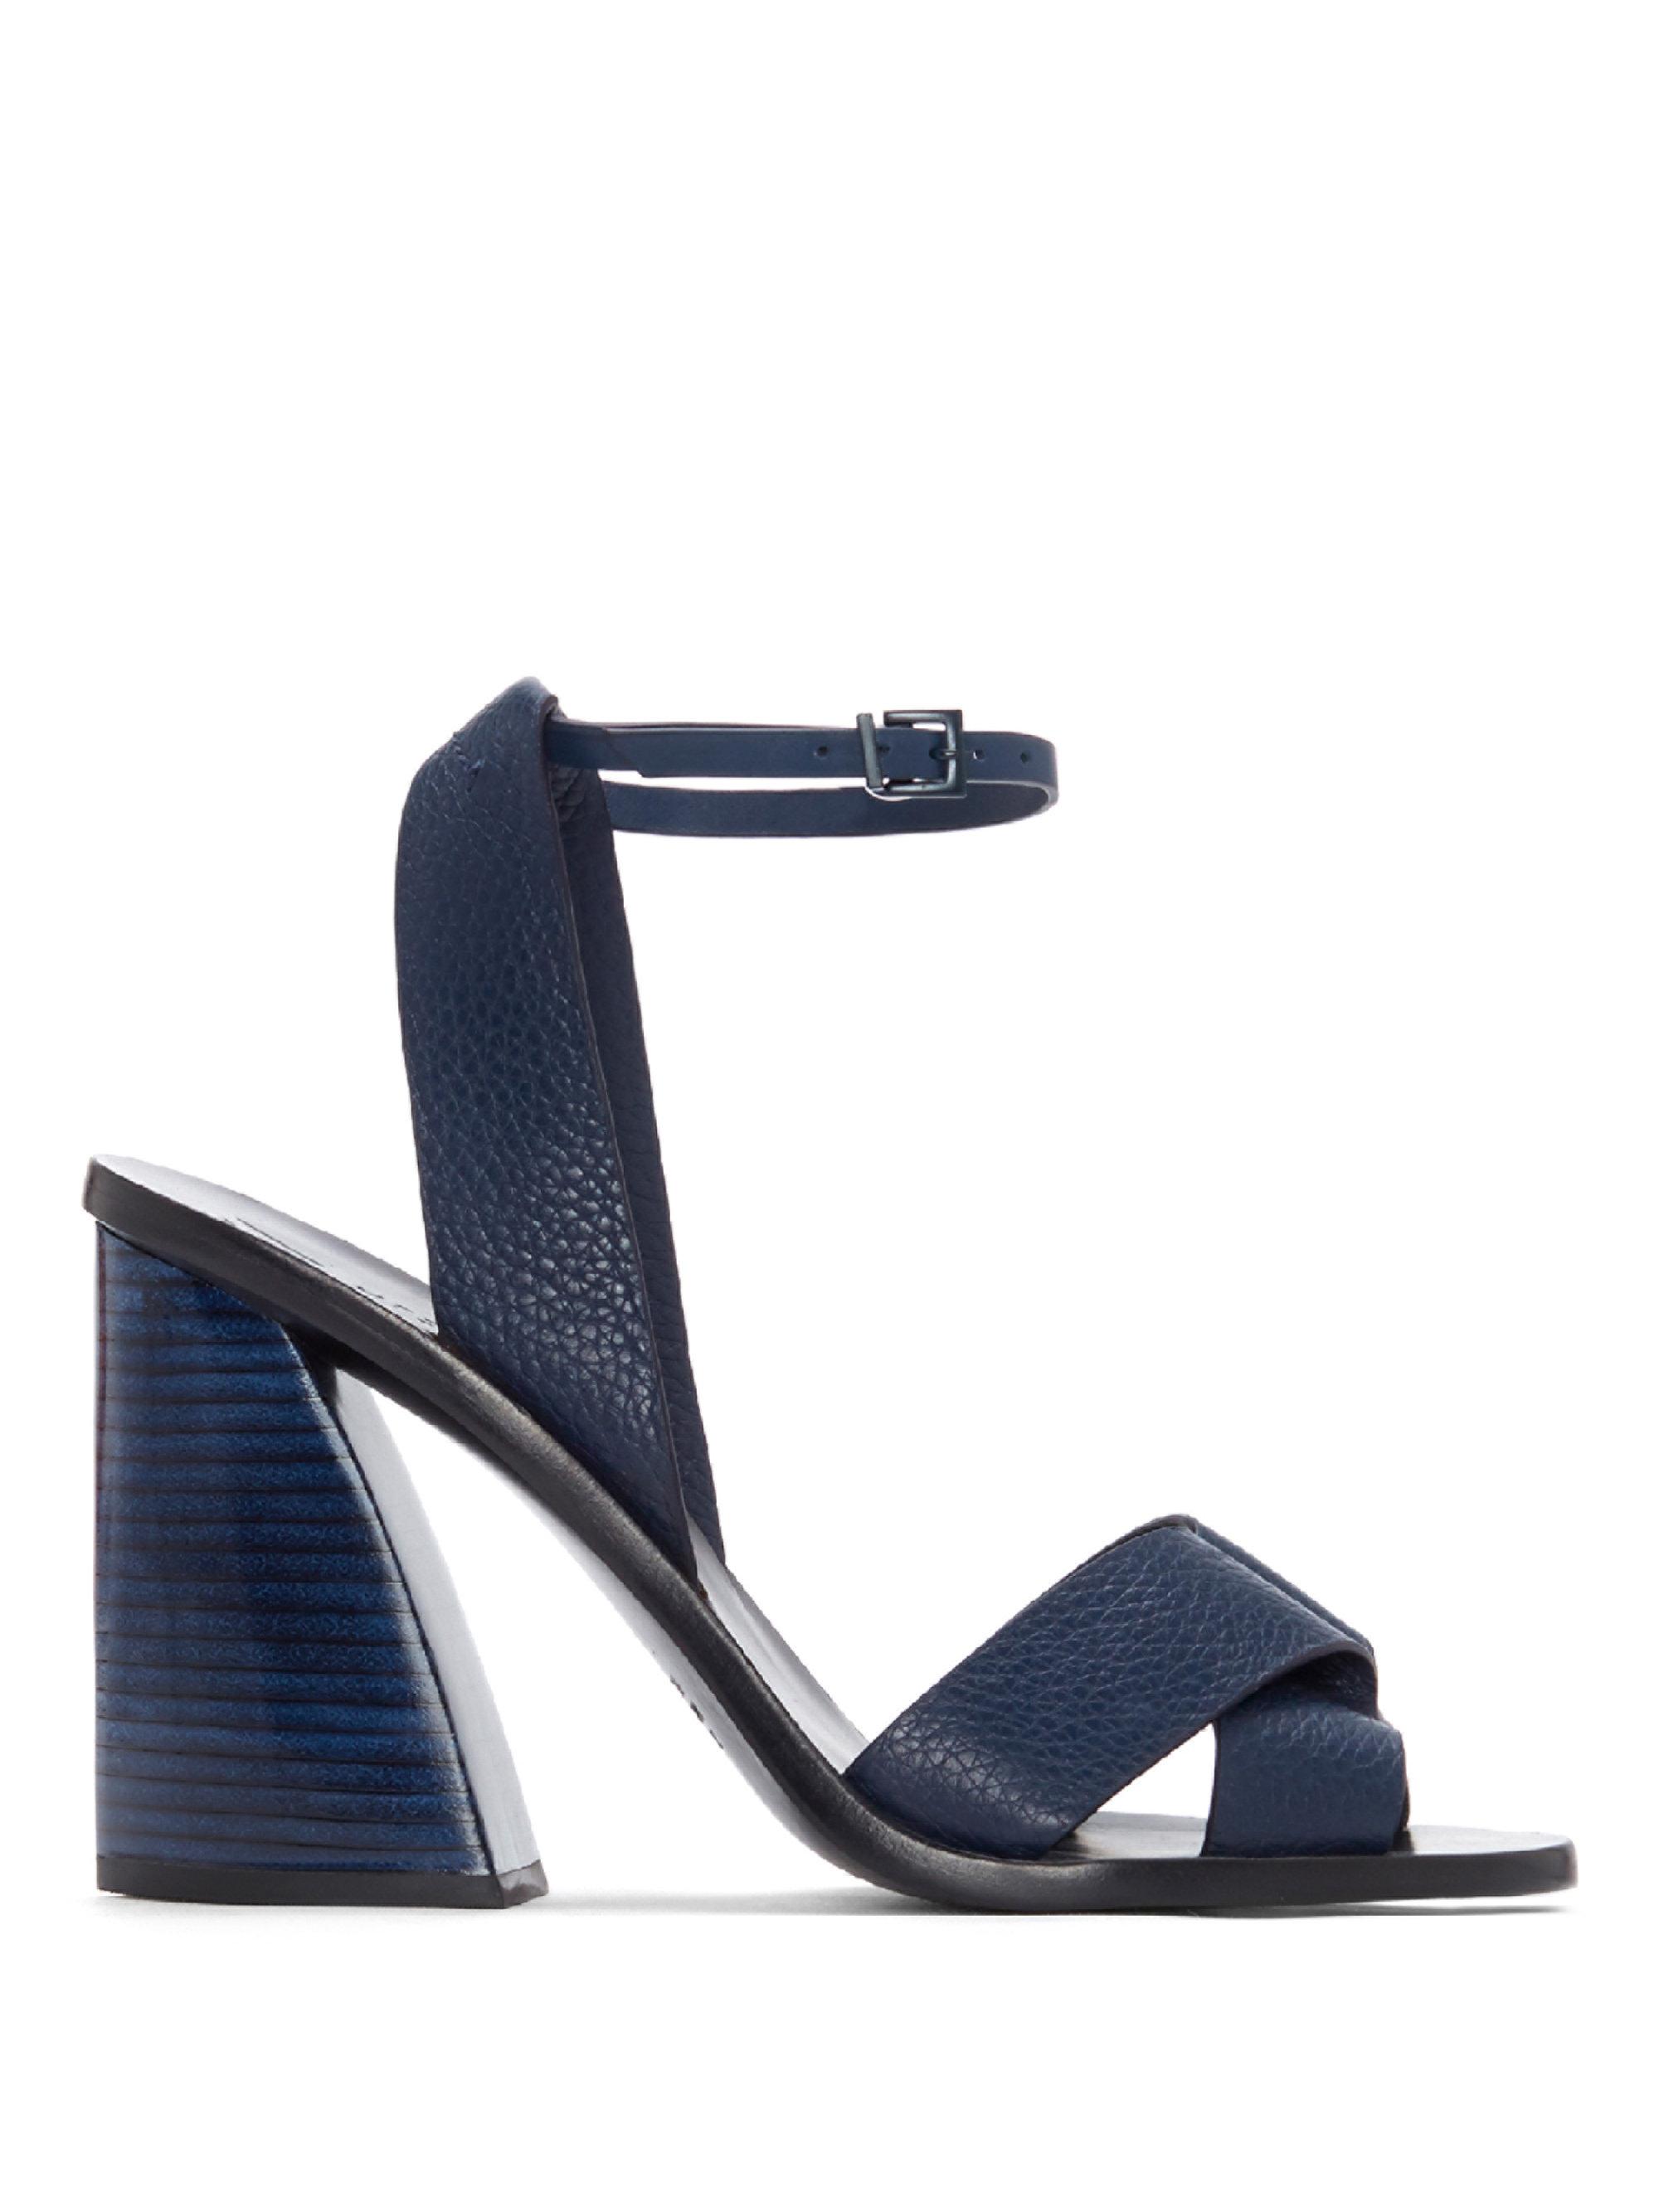 Lyst - Mercedes Castillo Alisanne Leather Sandals in Blue